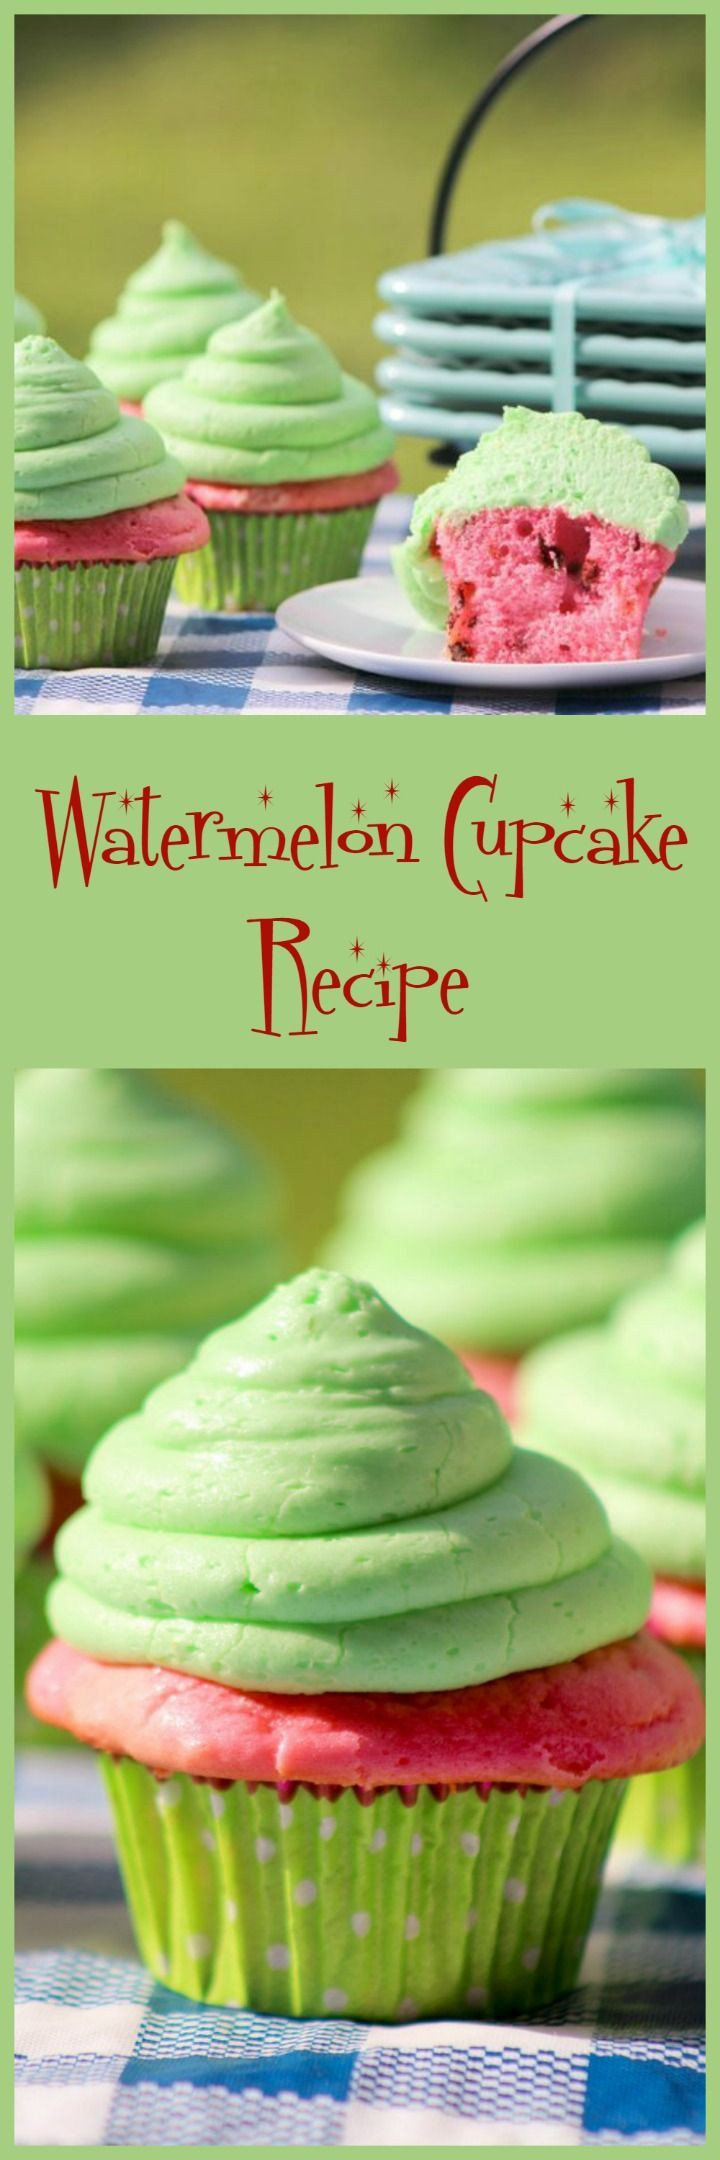 Summer Cupcakes Recipes
 Watermelon Cupcakes Recipe for Teens